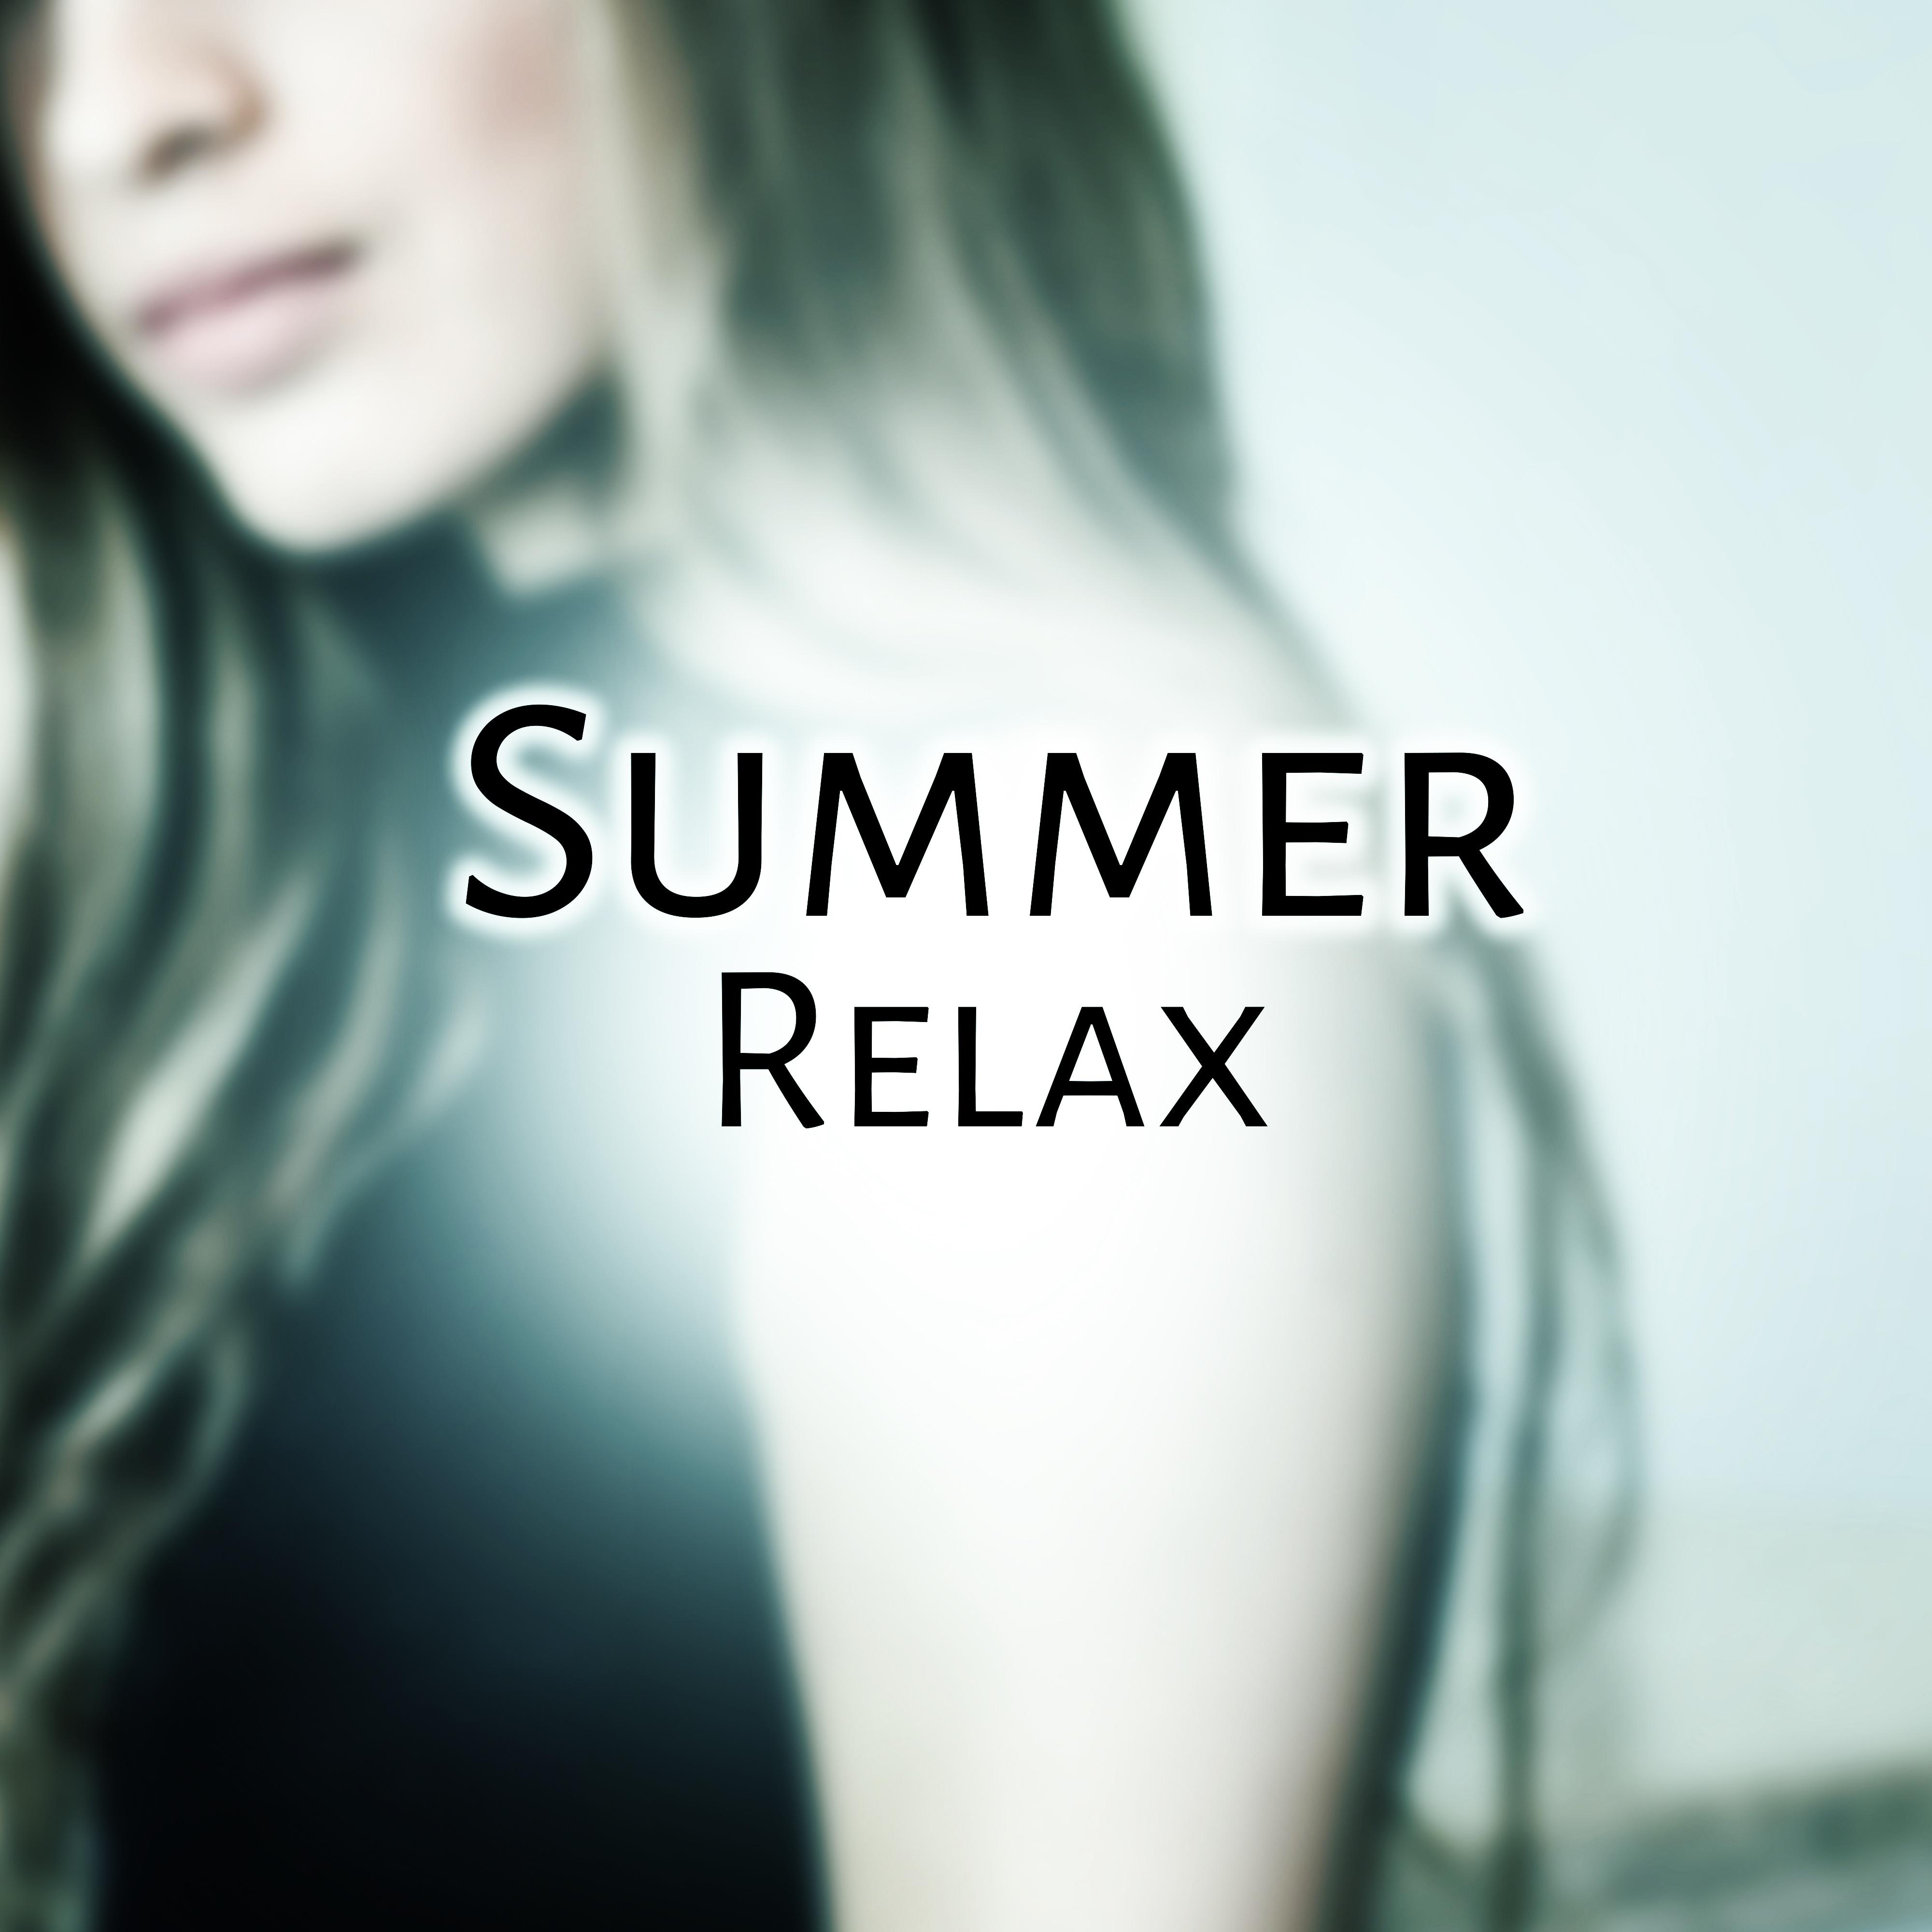 Summer Relax – Best Chill Out Music, Keep Calm, Pure Relaxation, Beach Sounds, Summertime, Zen Music for Pure Rest, Peaceful Mind